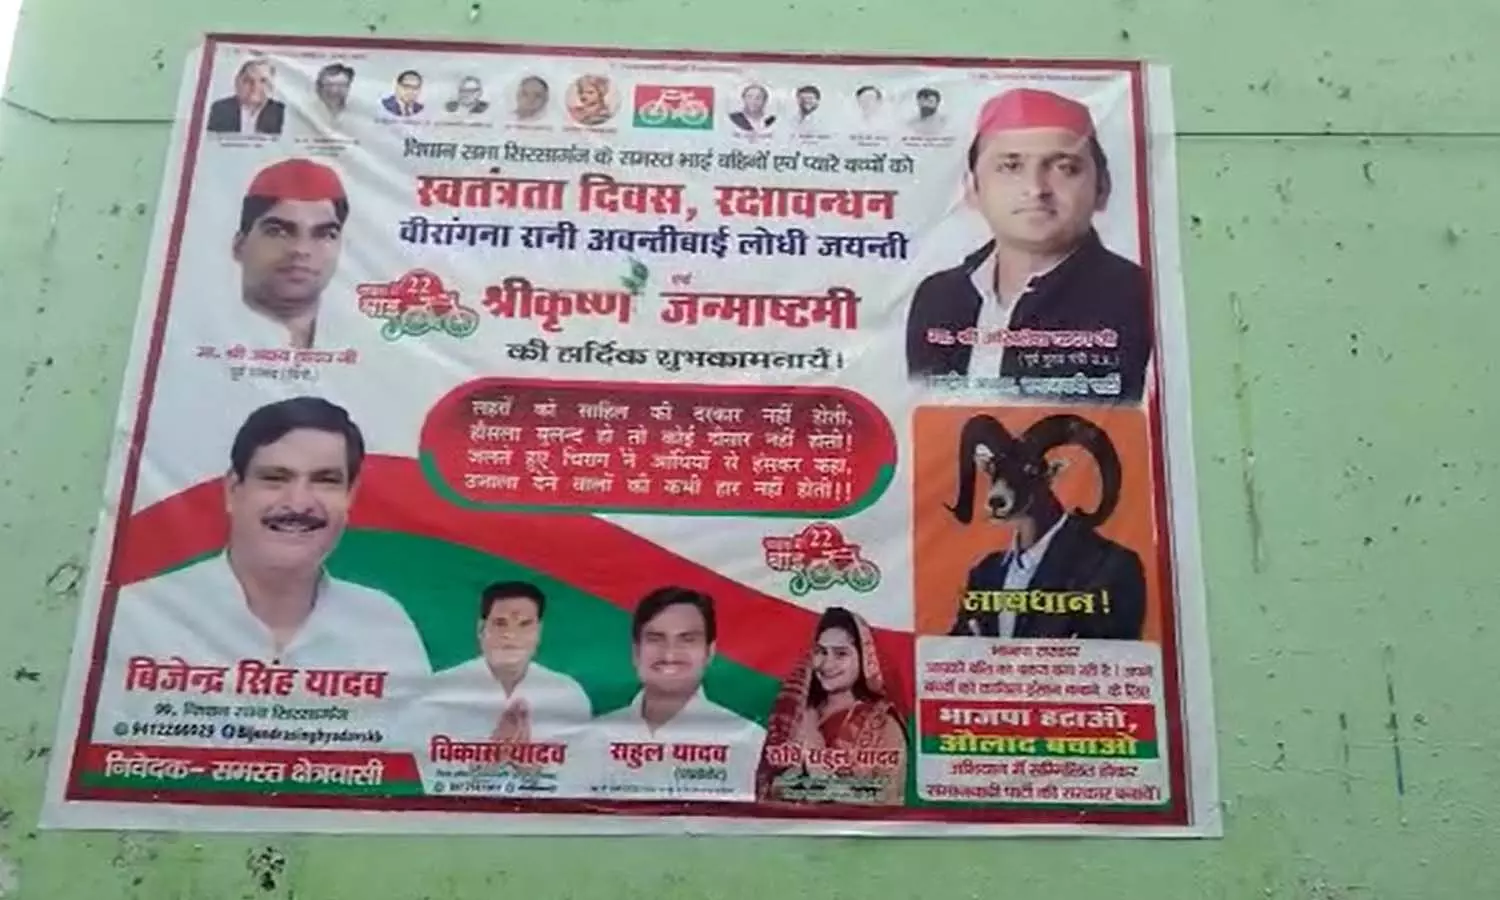 Remove BJP, save children, BJP is making you a scapegoat, SP has put up hoardings